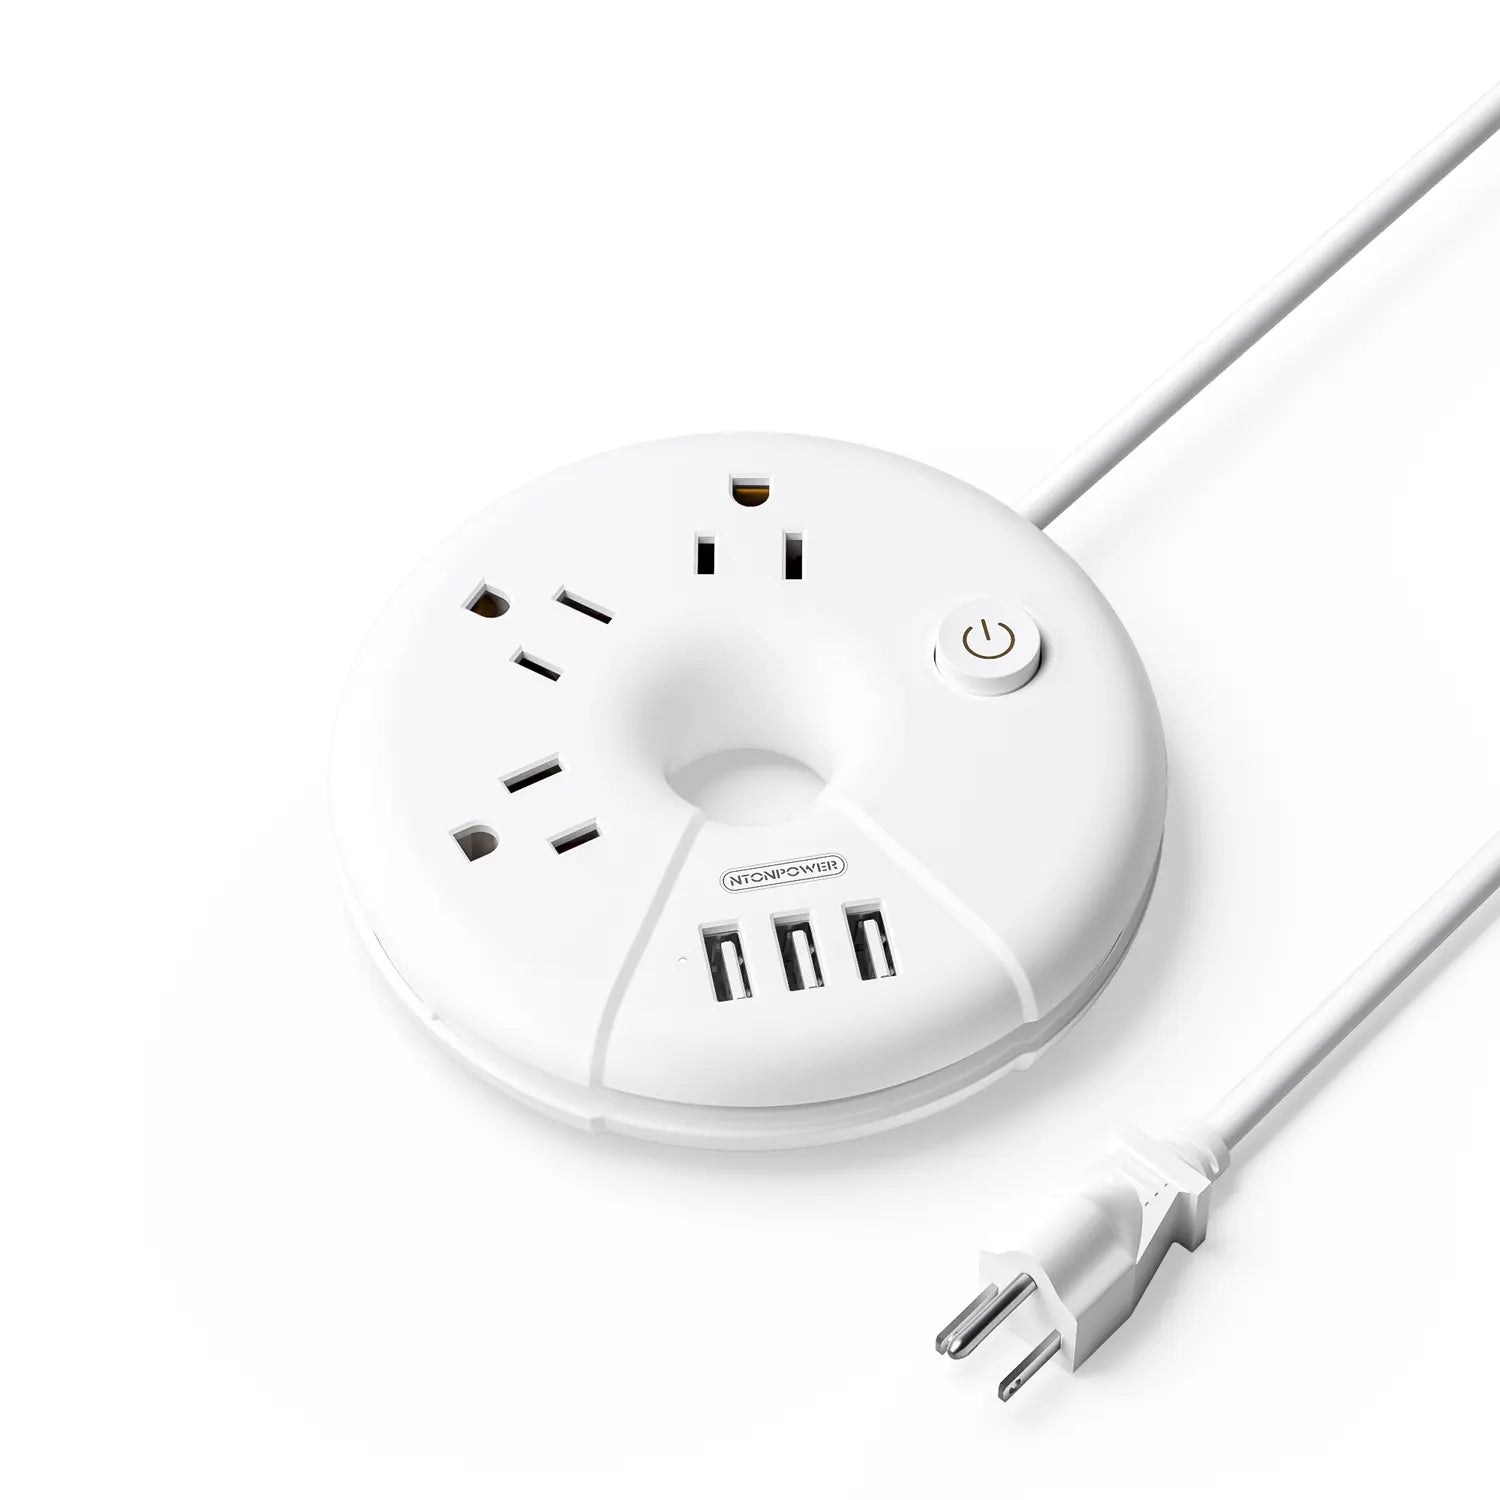 Ntonpower i-Donut Power Strip 3 Outlets 3 USB Small&Travel